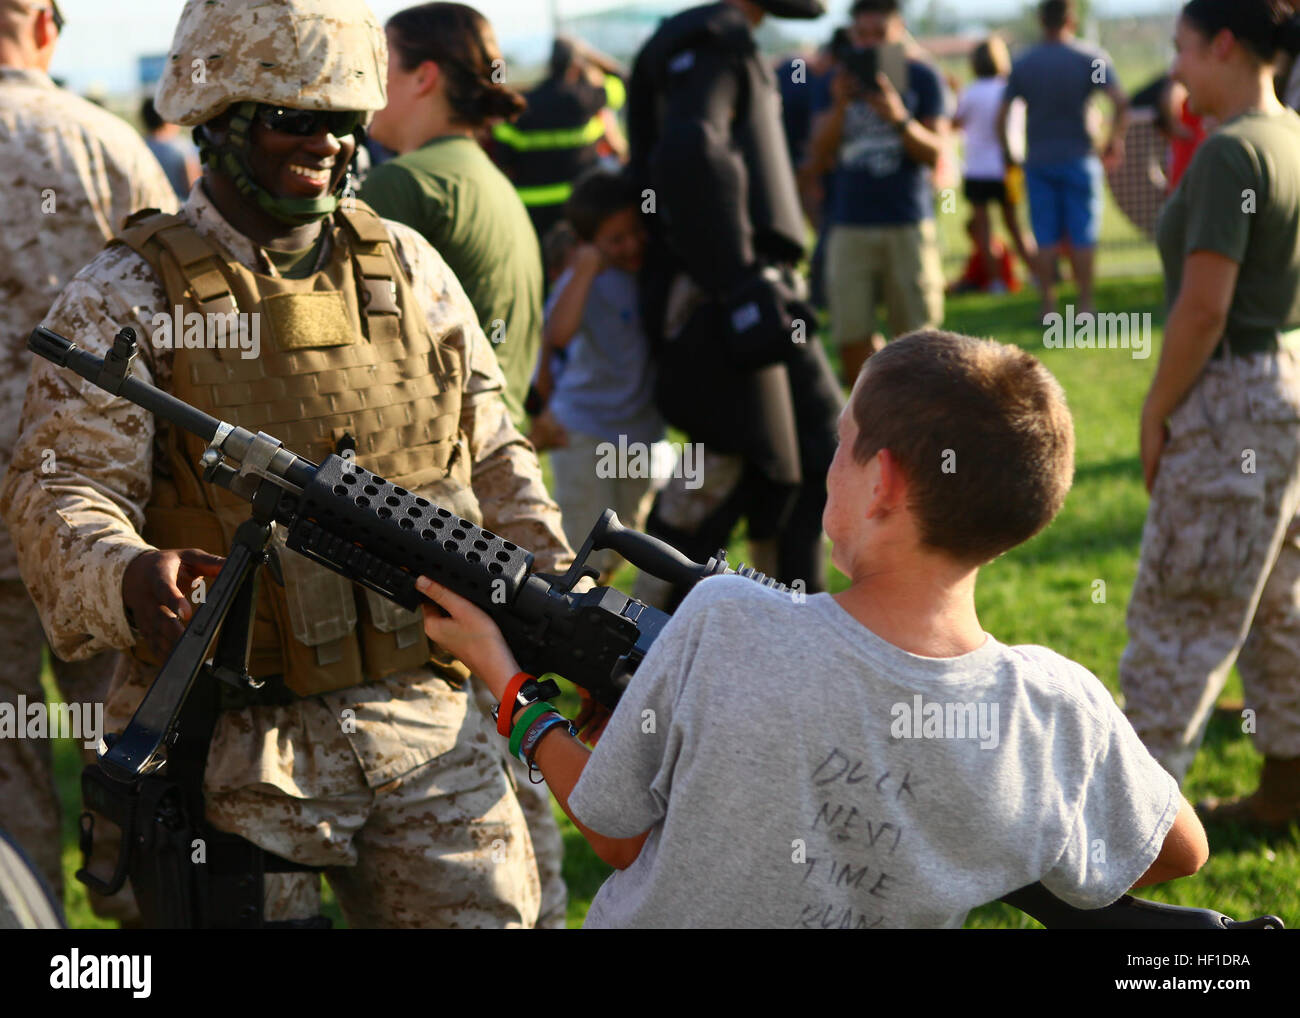 Gunnery Sgt. Octavius Shivers, the logistics chief with Special-Purpose Marine Air-Ground Task Force Africa 13, smiles as he shows off the M240G machine gun to a young-boy during the National Night Out event aboard Naval Air Station Sigonella, Italy, Aug. 6, 2013.  Marines and sailors with Special-Purpose MAGTF Africa participated in the event with a static display of weapons, both lethal and non-lethal. Special-Purpose MAGTF Africa continues to build relationships with the community while simultaneously strengthening U.S. Africa Command and U.S. Marine Corps Forces Africa's ability to assist  Stock Photo